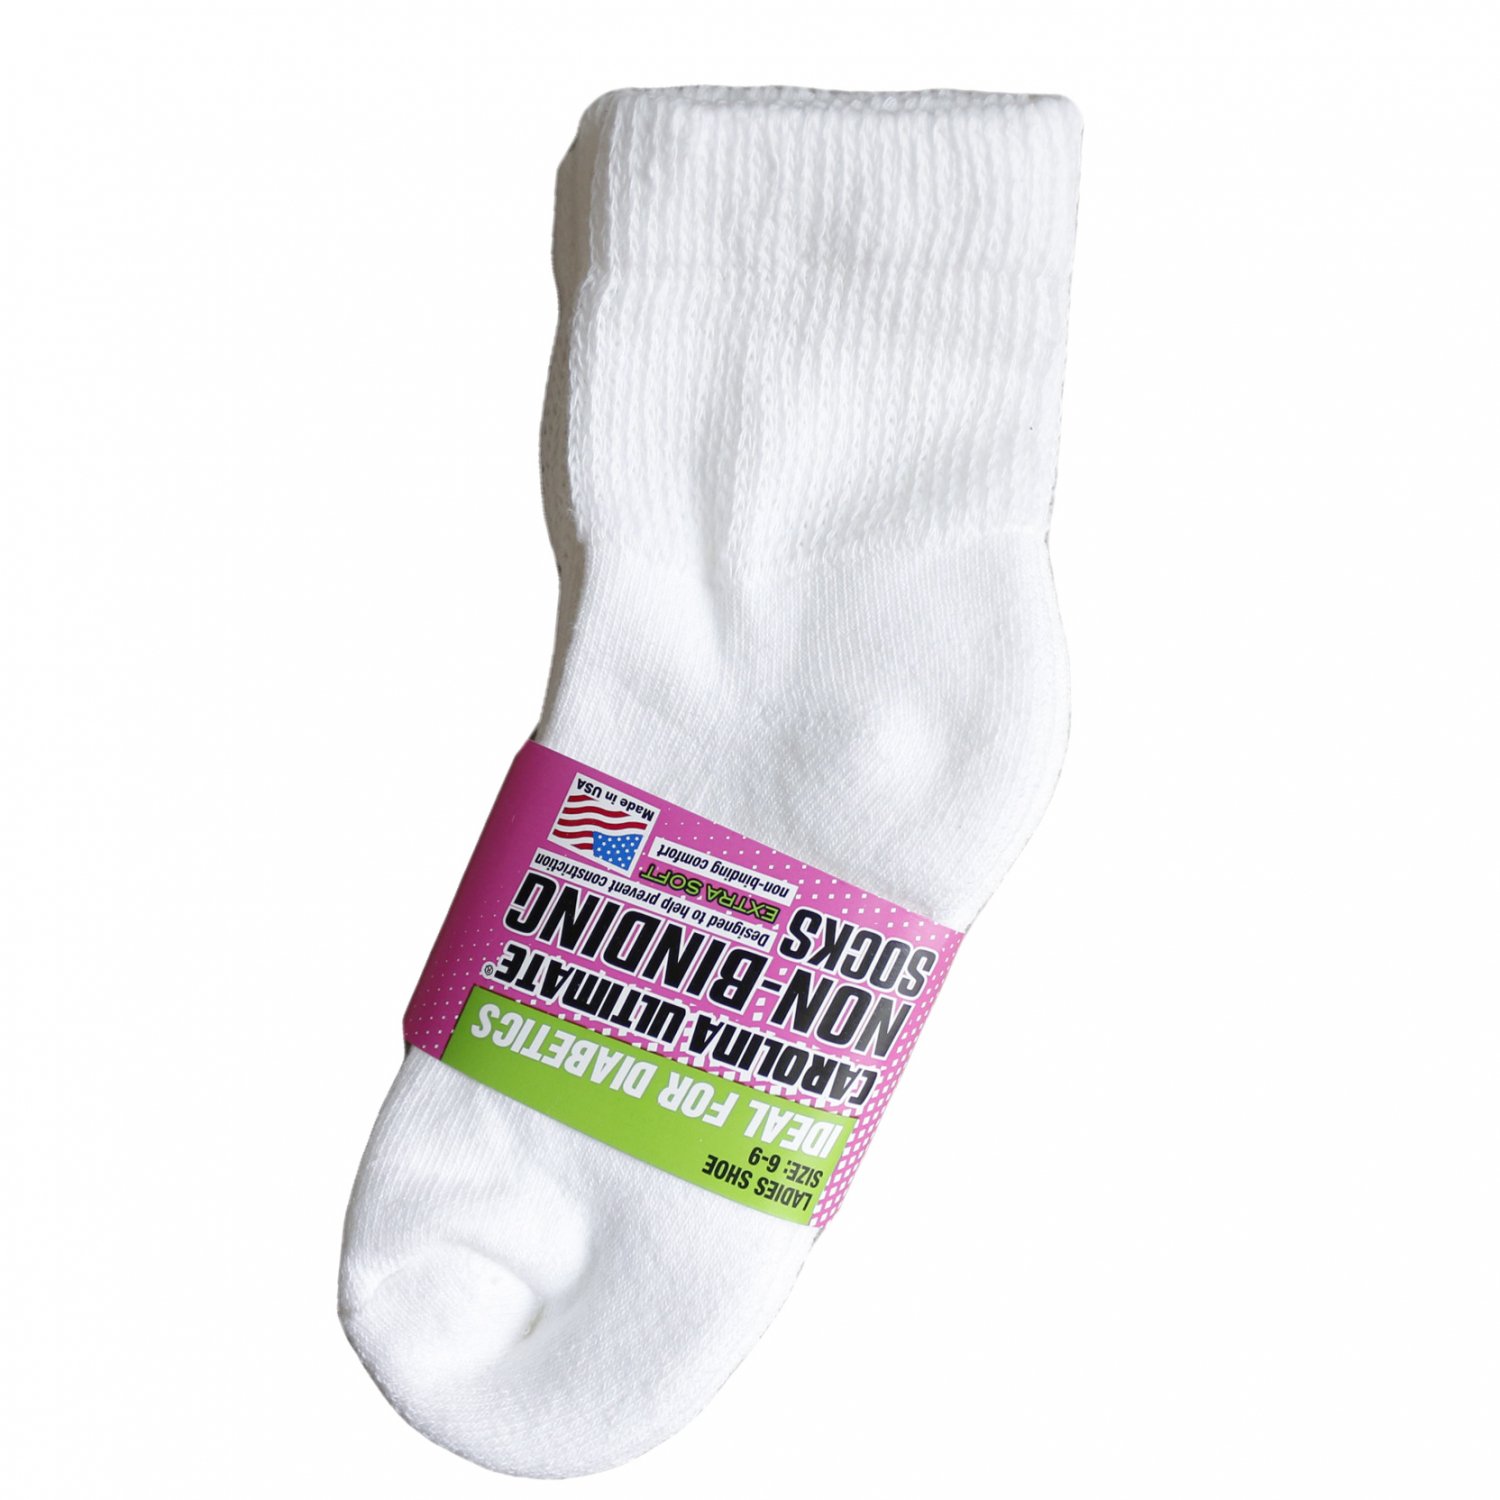 <img class='new_mark_img1' src='https://img.shop-pro.jp/img/new/icons8.gif' style='border:none;display:inline;margin:0px;padding:0px;width:auto;' />Military DEADSTOCK / Non-Binding Quarter Socks 2pk